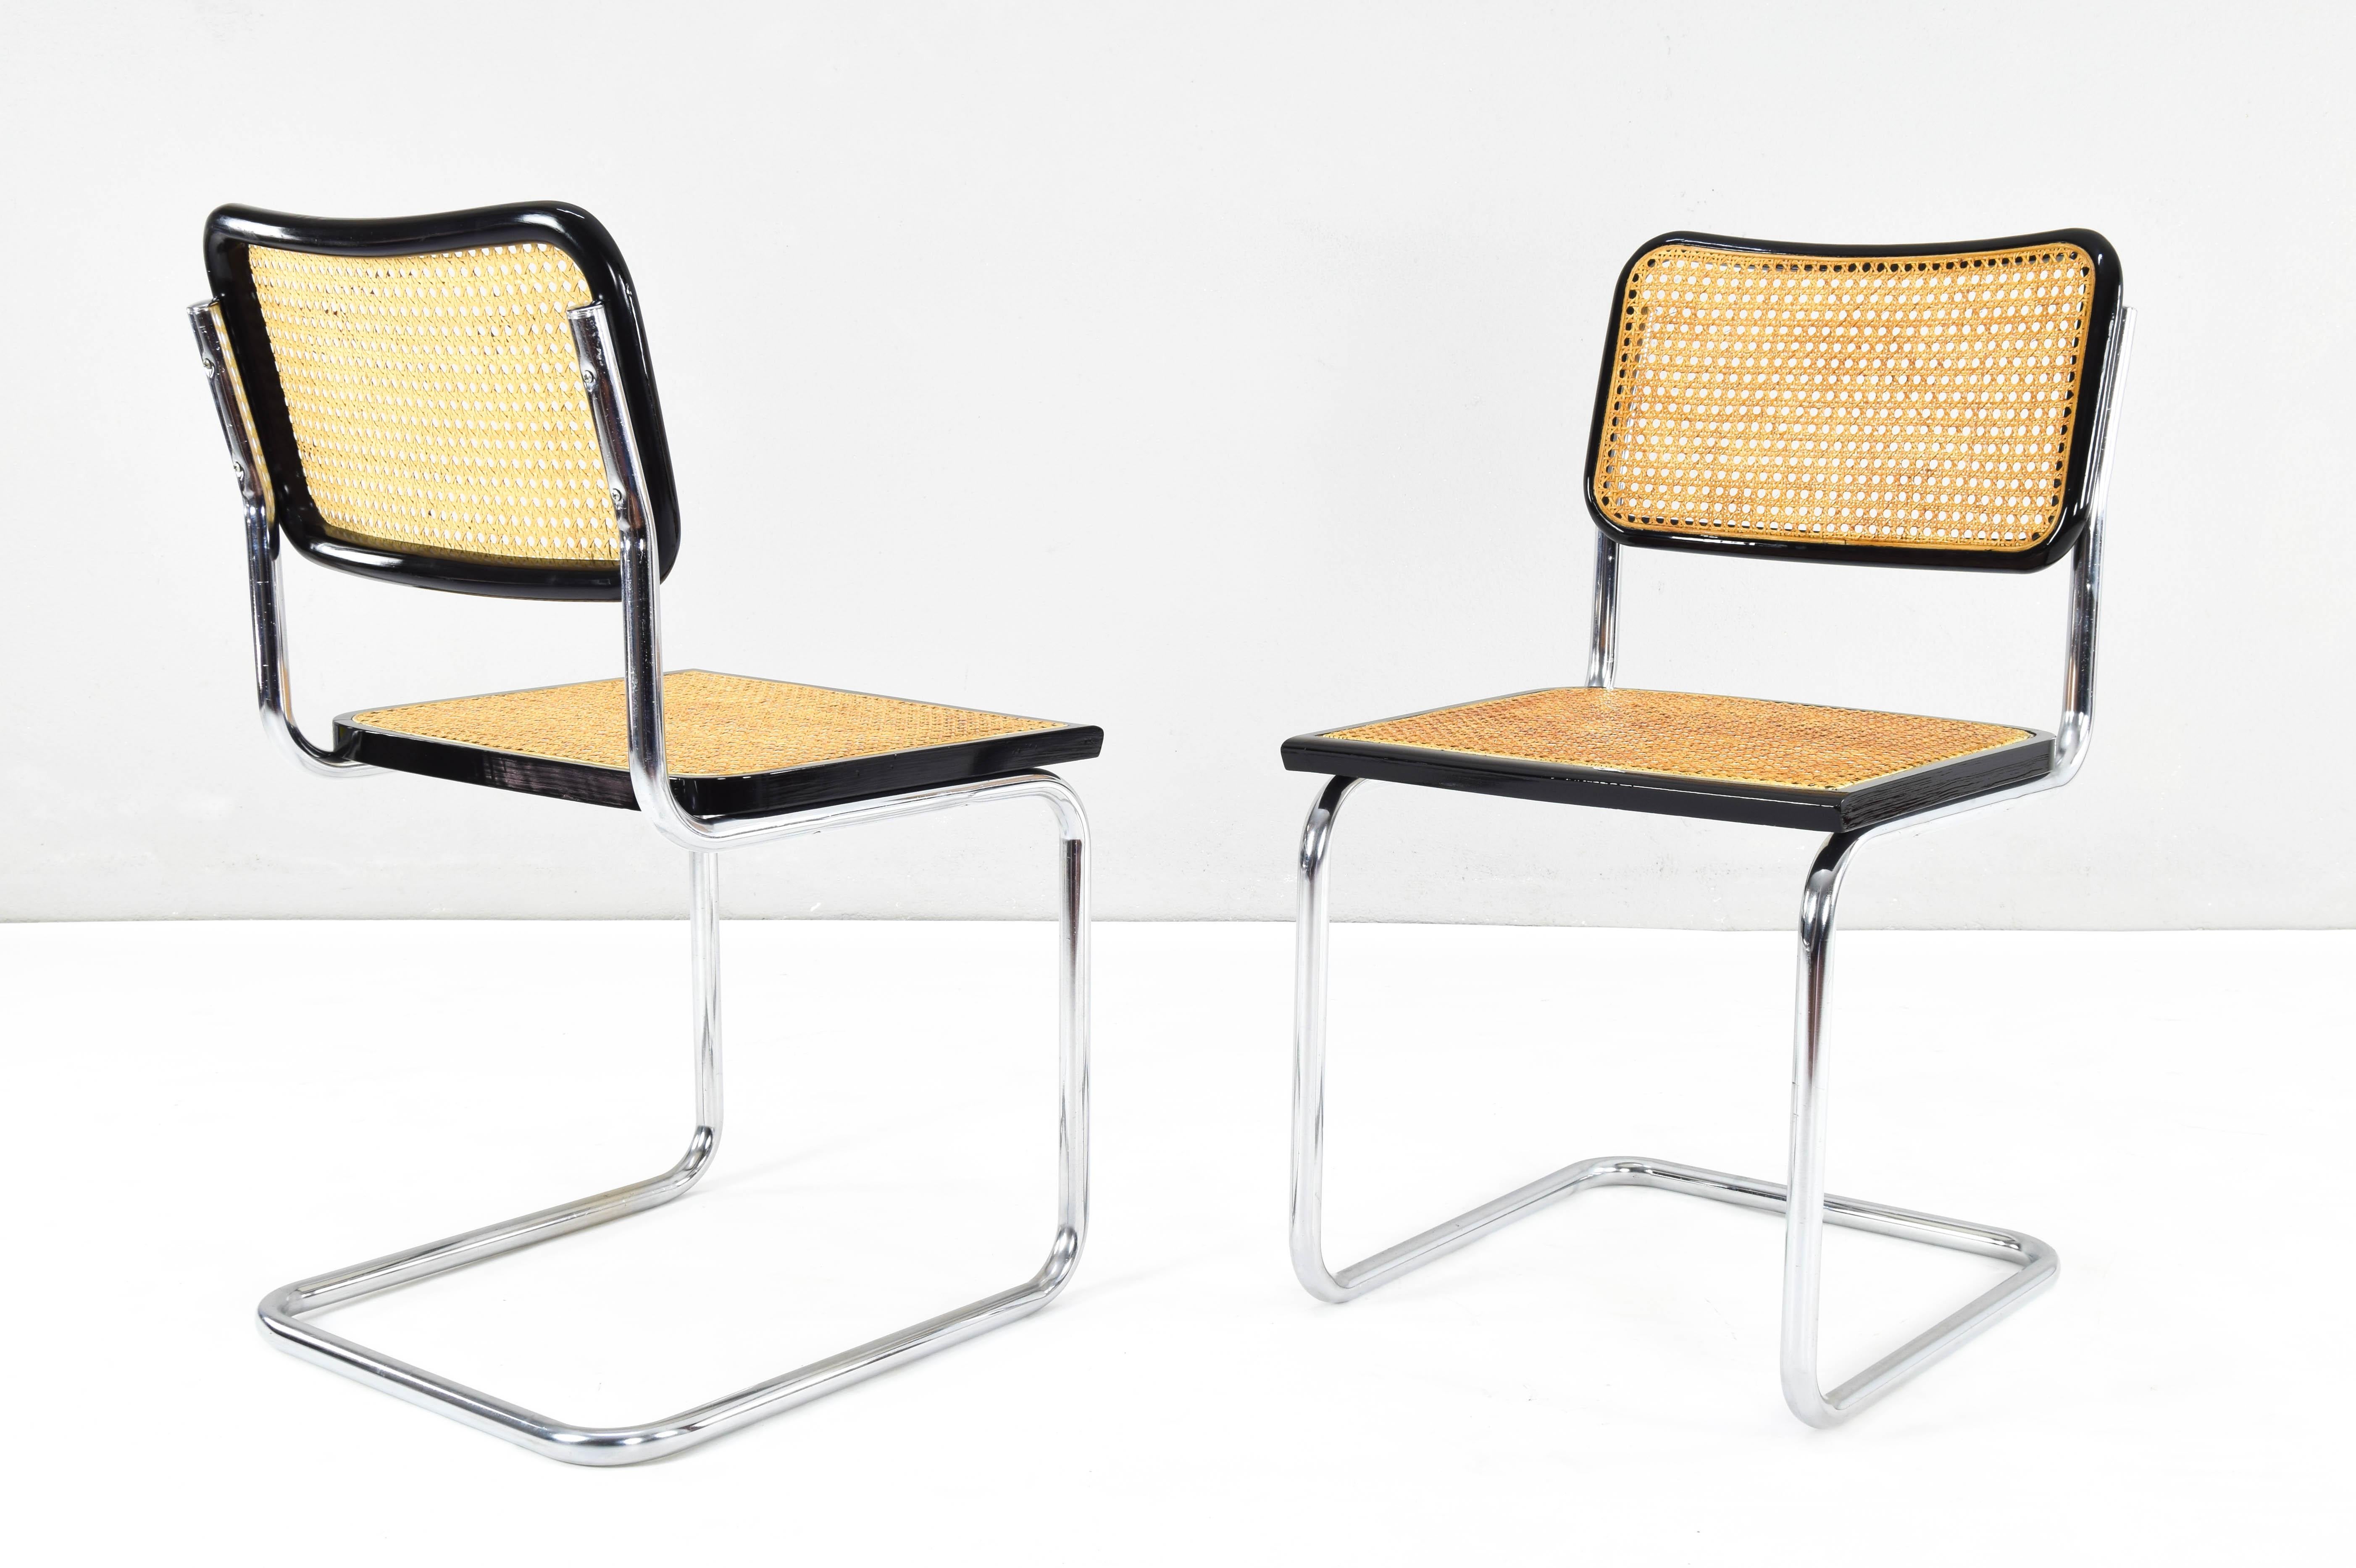 Late 20th Century Set of Two Mid-Century Modern Marcel Breuer B32 Cesca Chairs, Italy 1970s